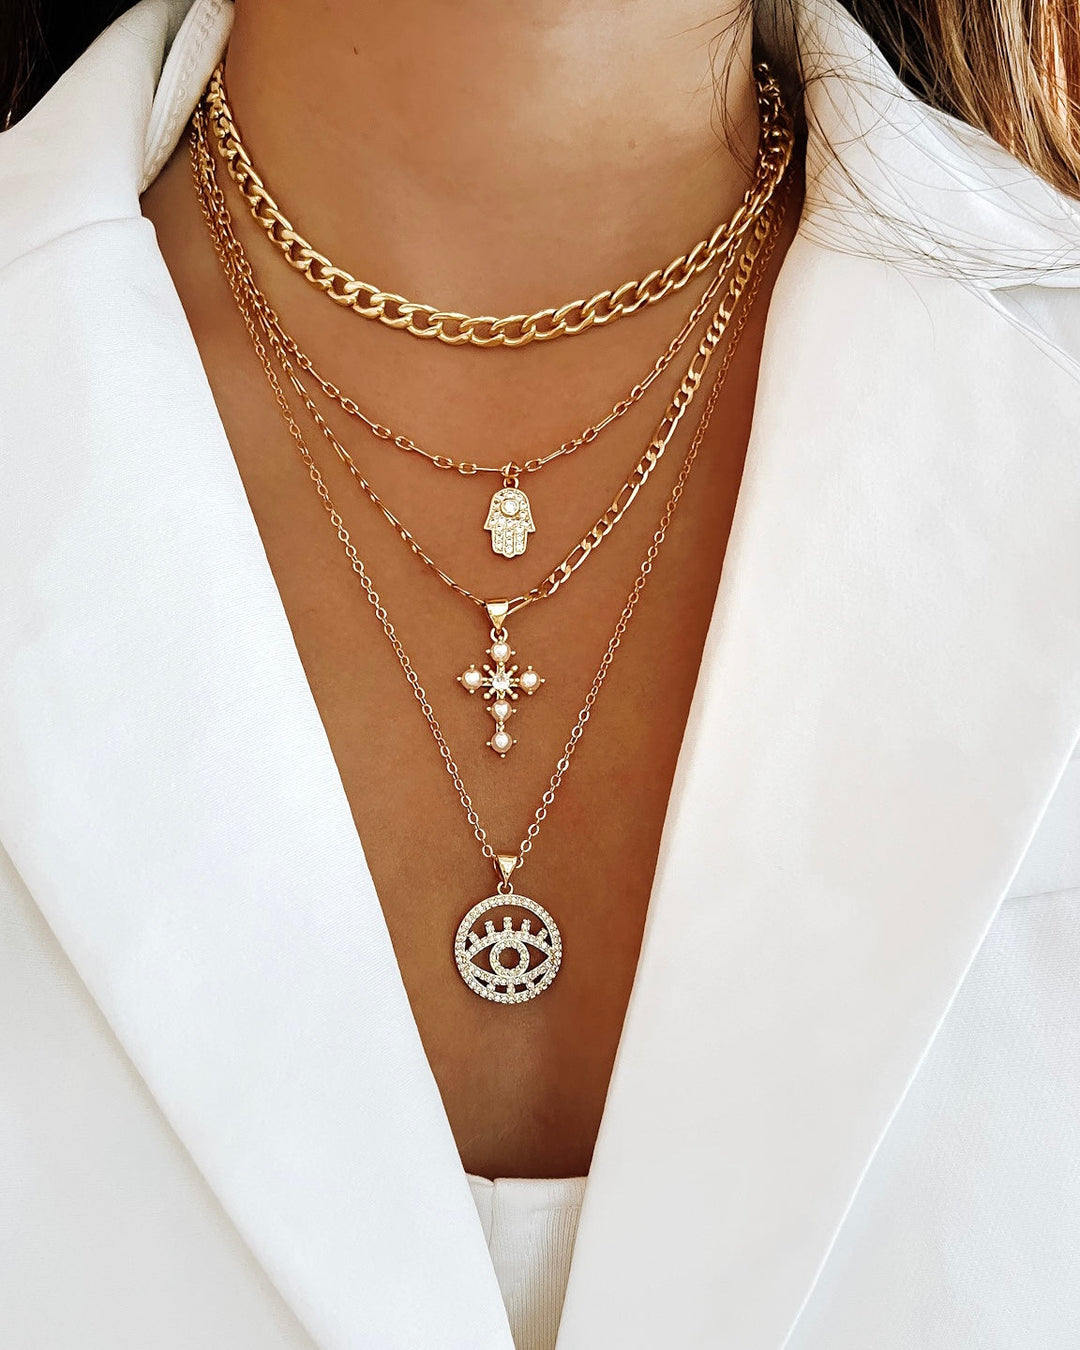 Dainty Hamsa Hand Necklace - Gold Filled